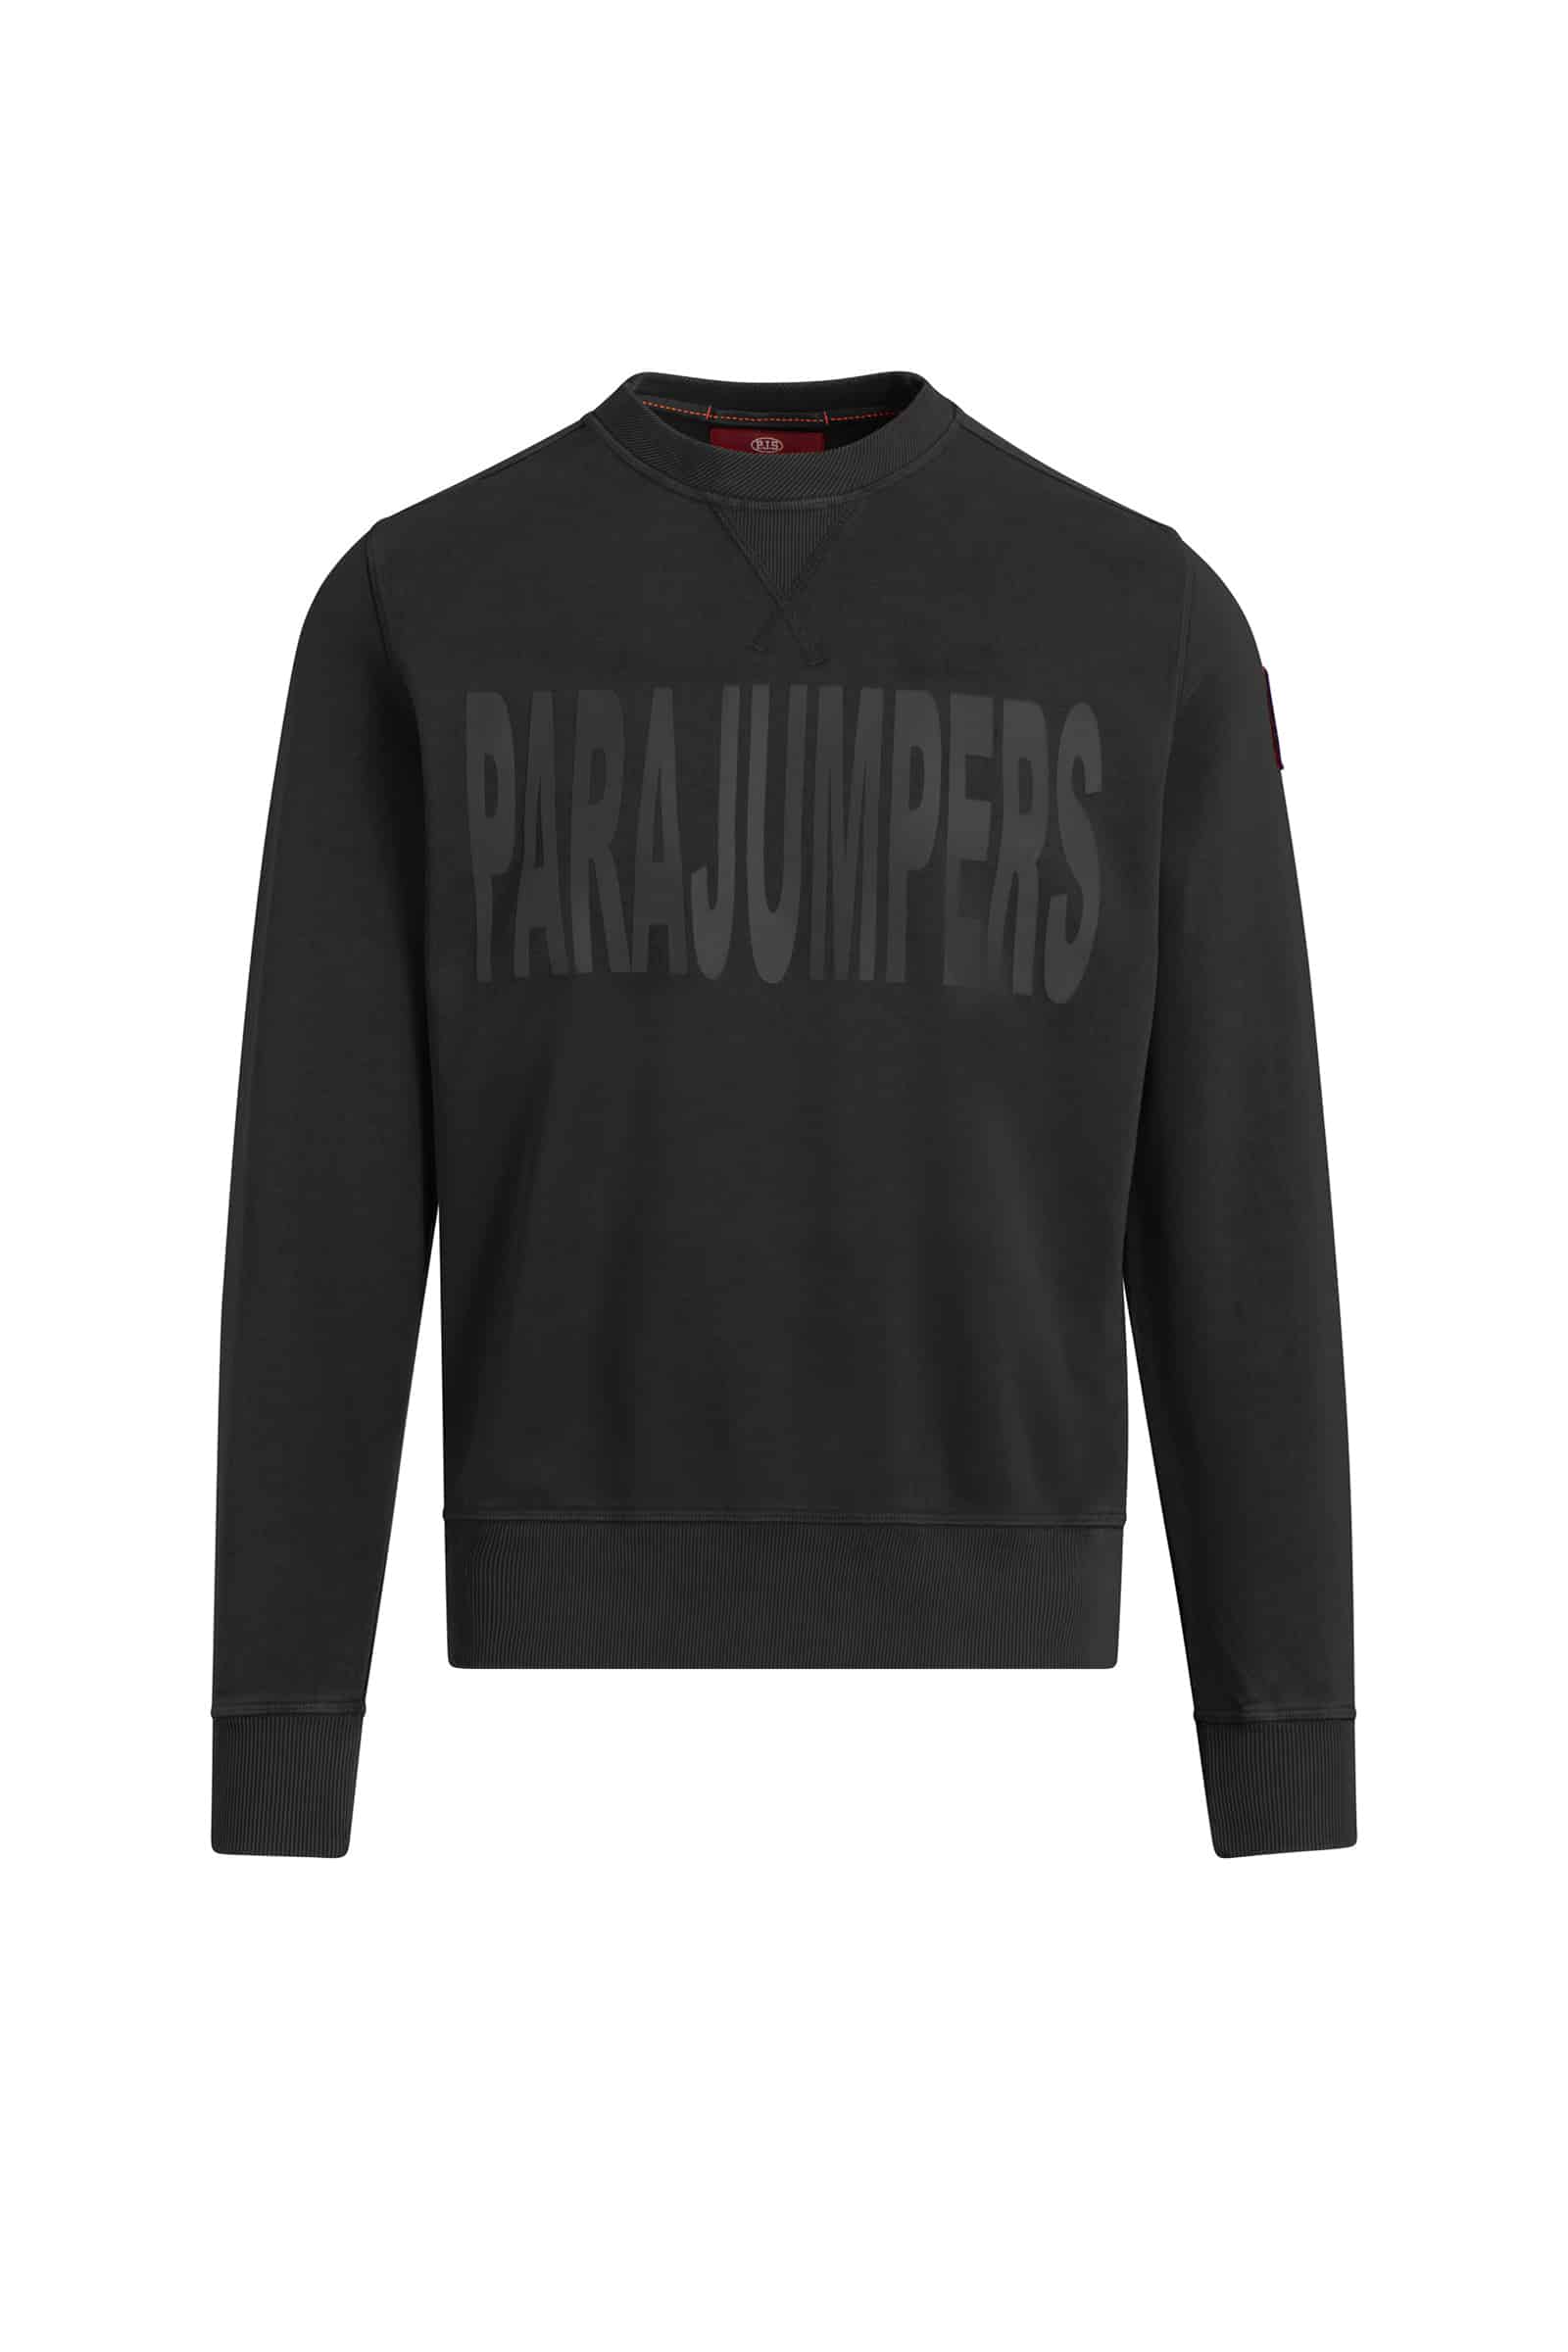 parajumpers sweater sale